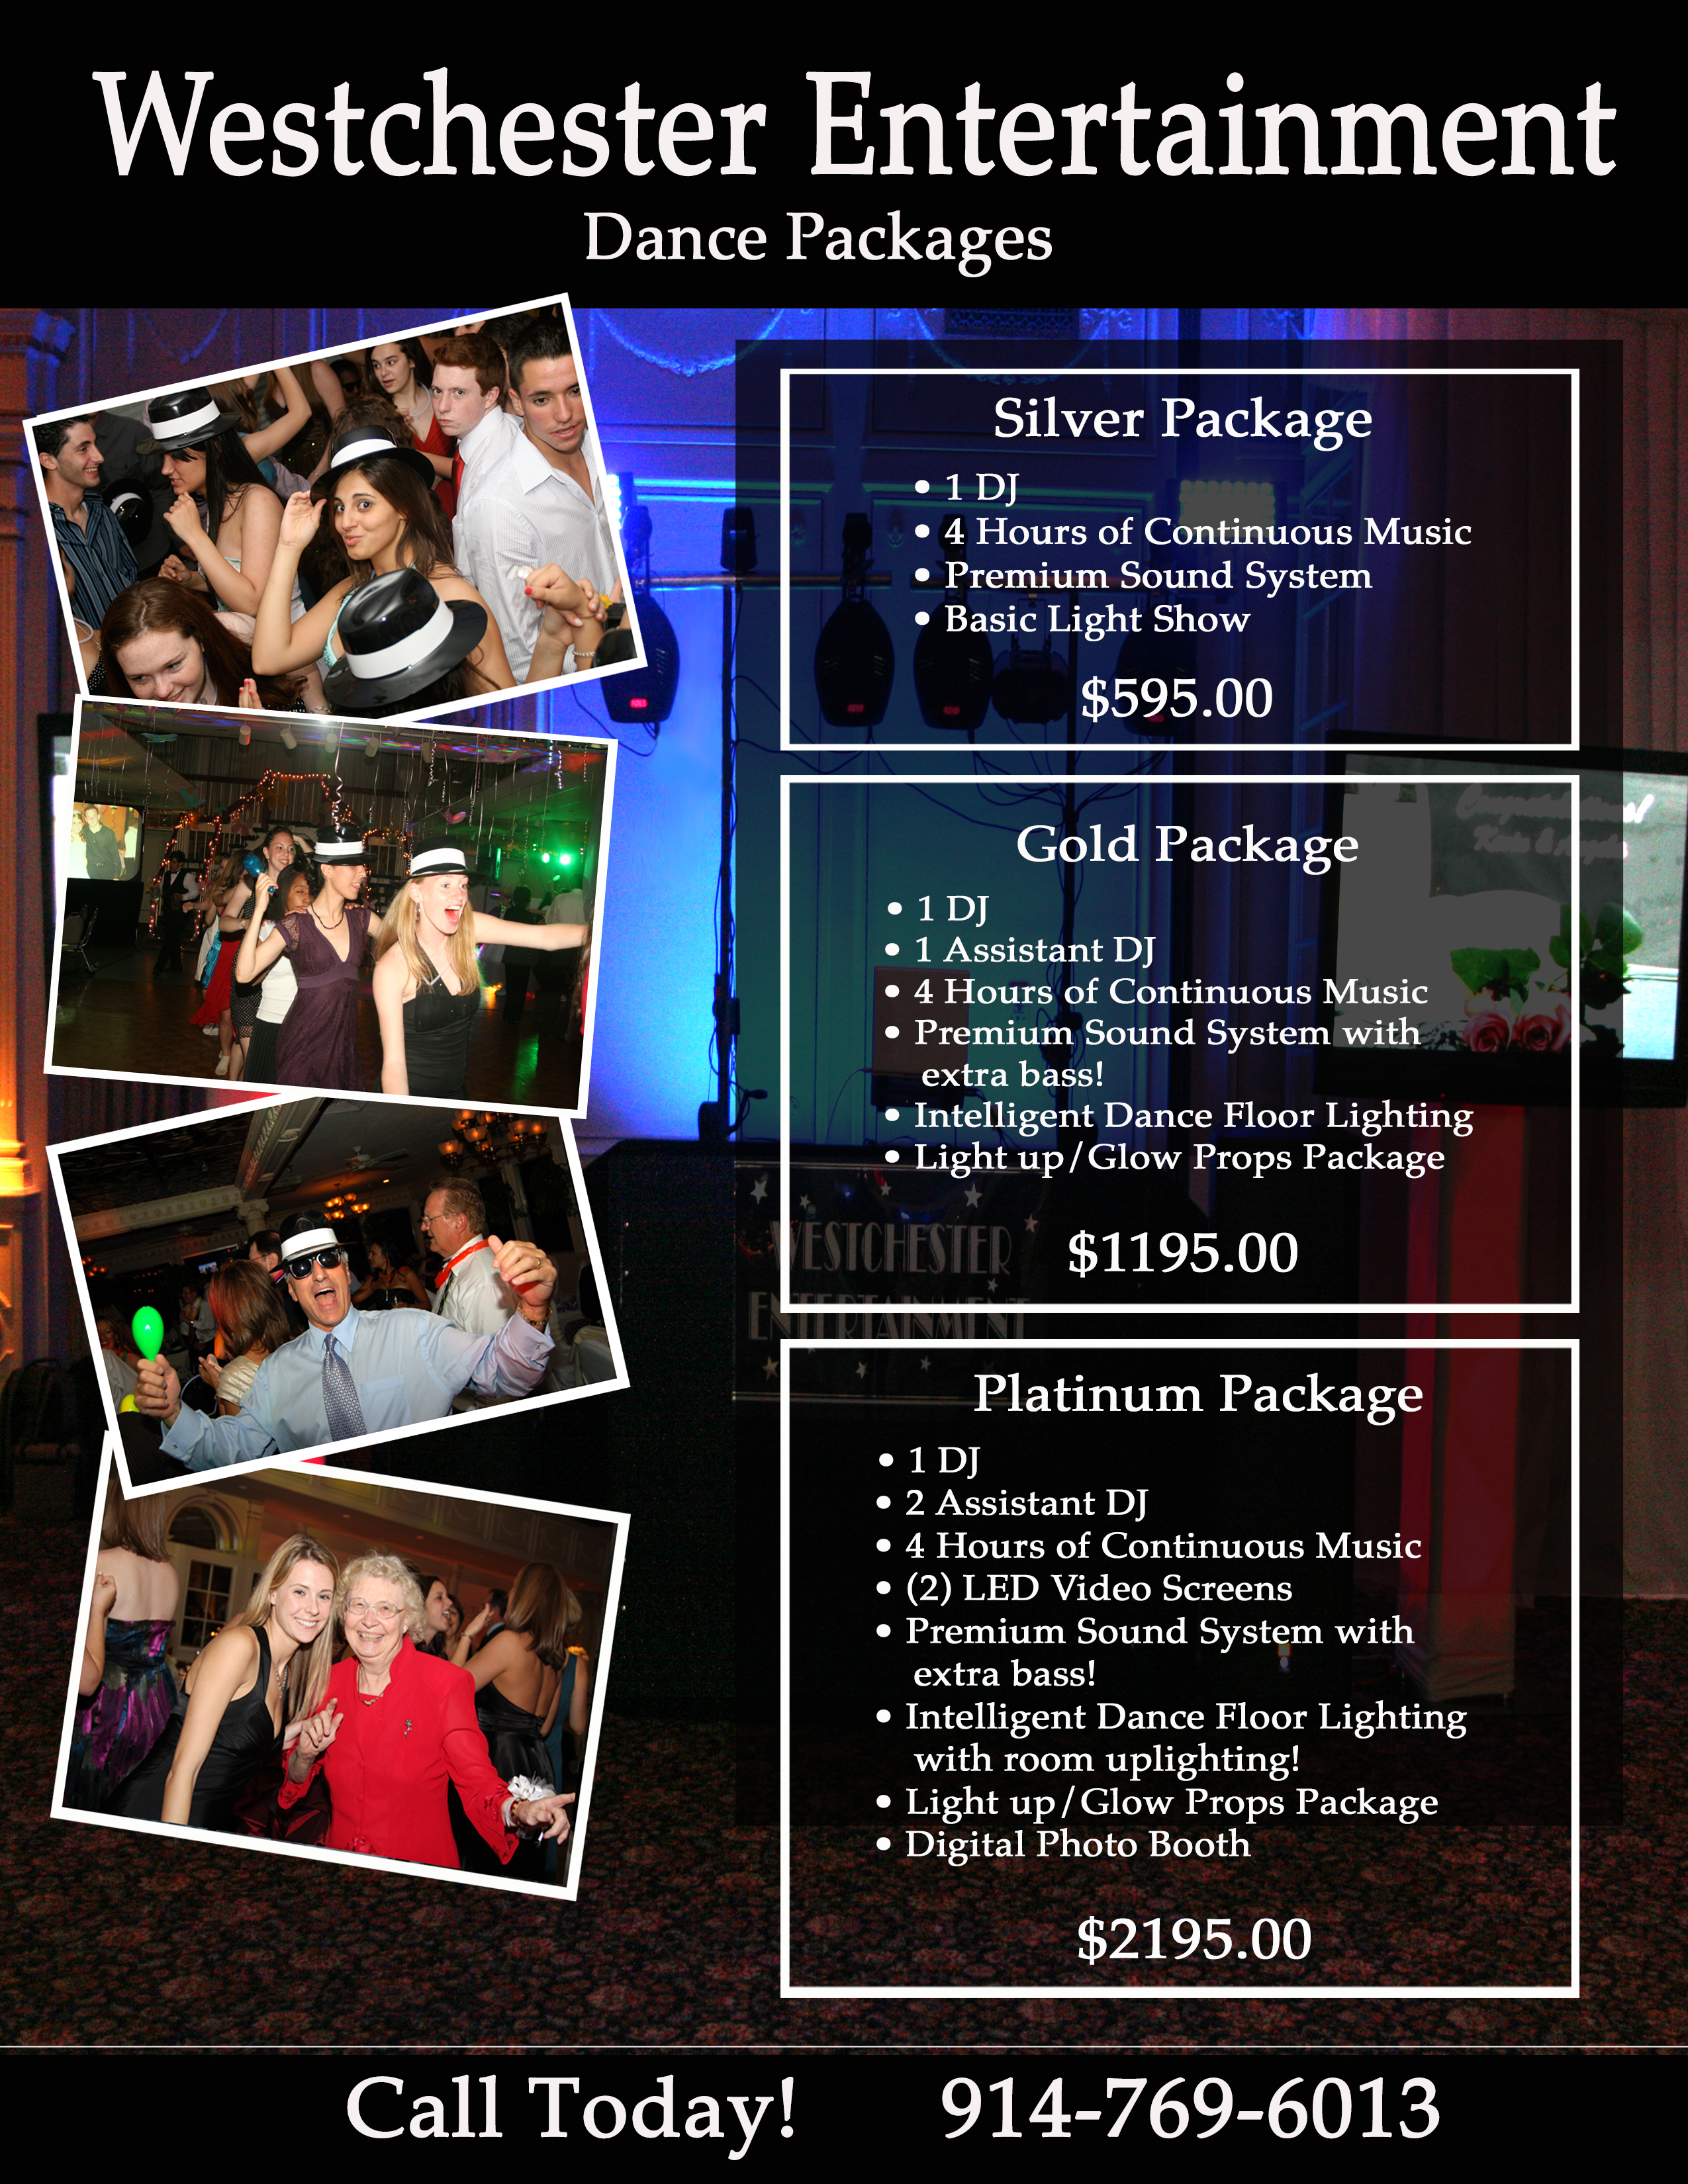 DJ Packages for Sweet 16's in Somers NY, Carmel NY, Danbury CT, Brookfield CT, White Plains NY, Scarsdale NY, Cortlandt NY. Photo Booths are also available